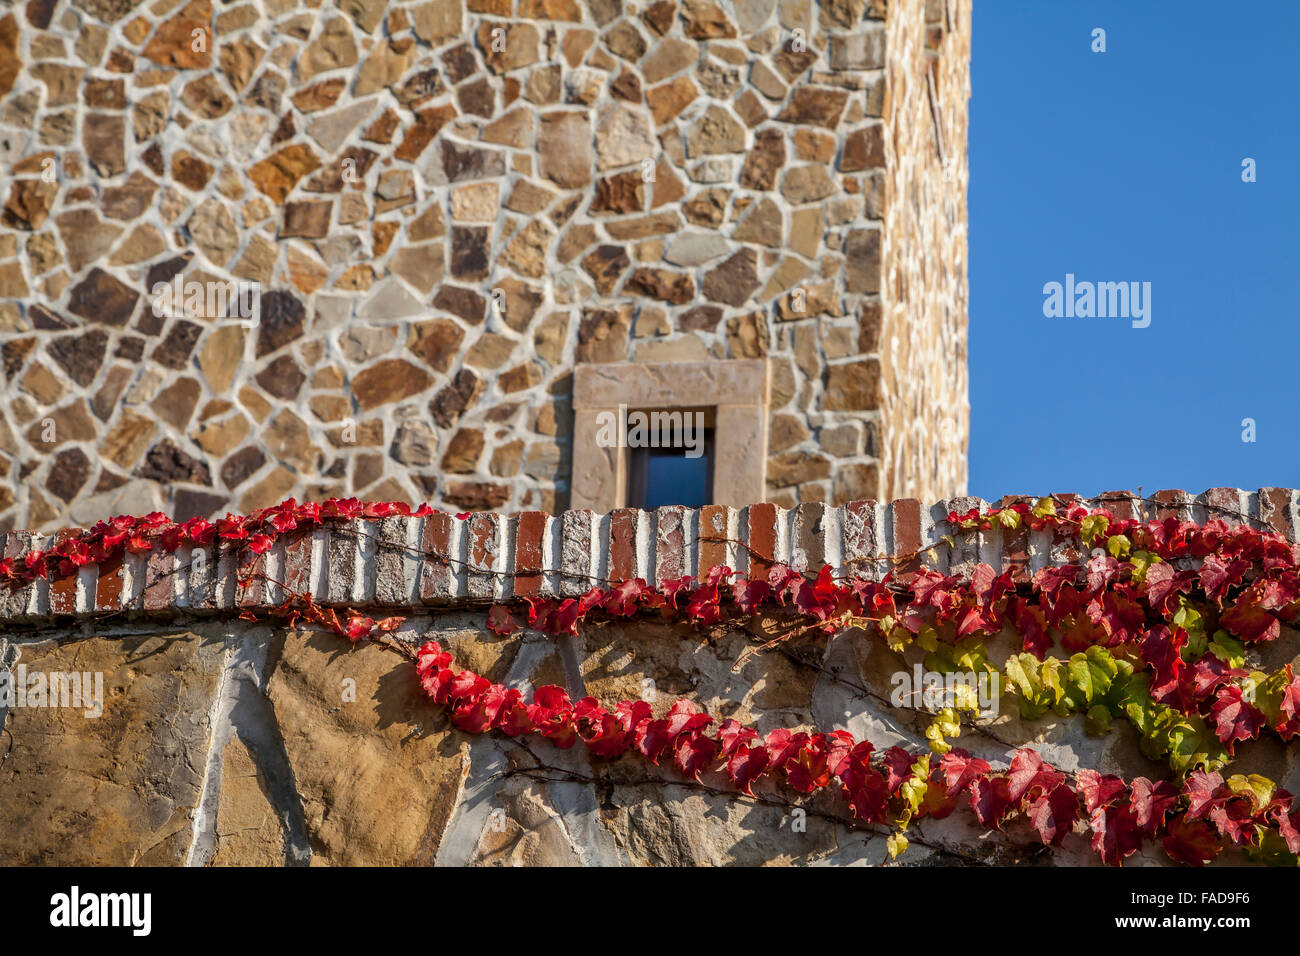 Ivy climbing over a stone wall of a building at the Jazucci Family Vineyard, Sonoma, California, USA Stock Photo